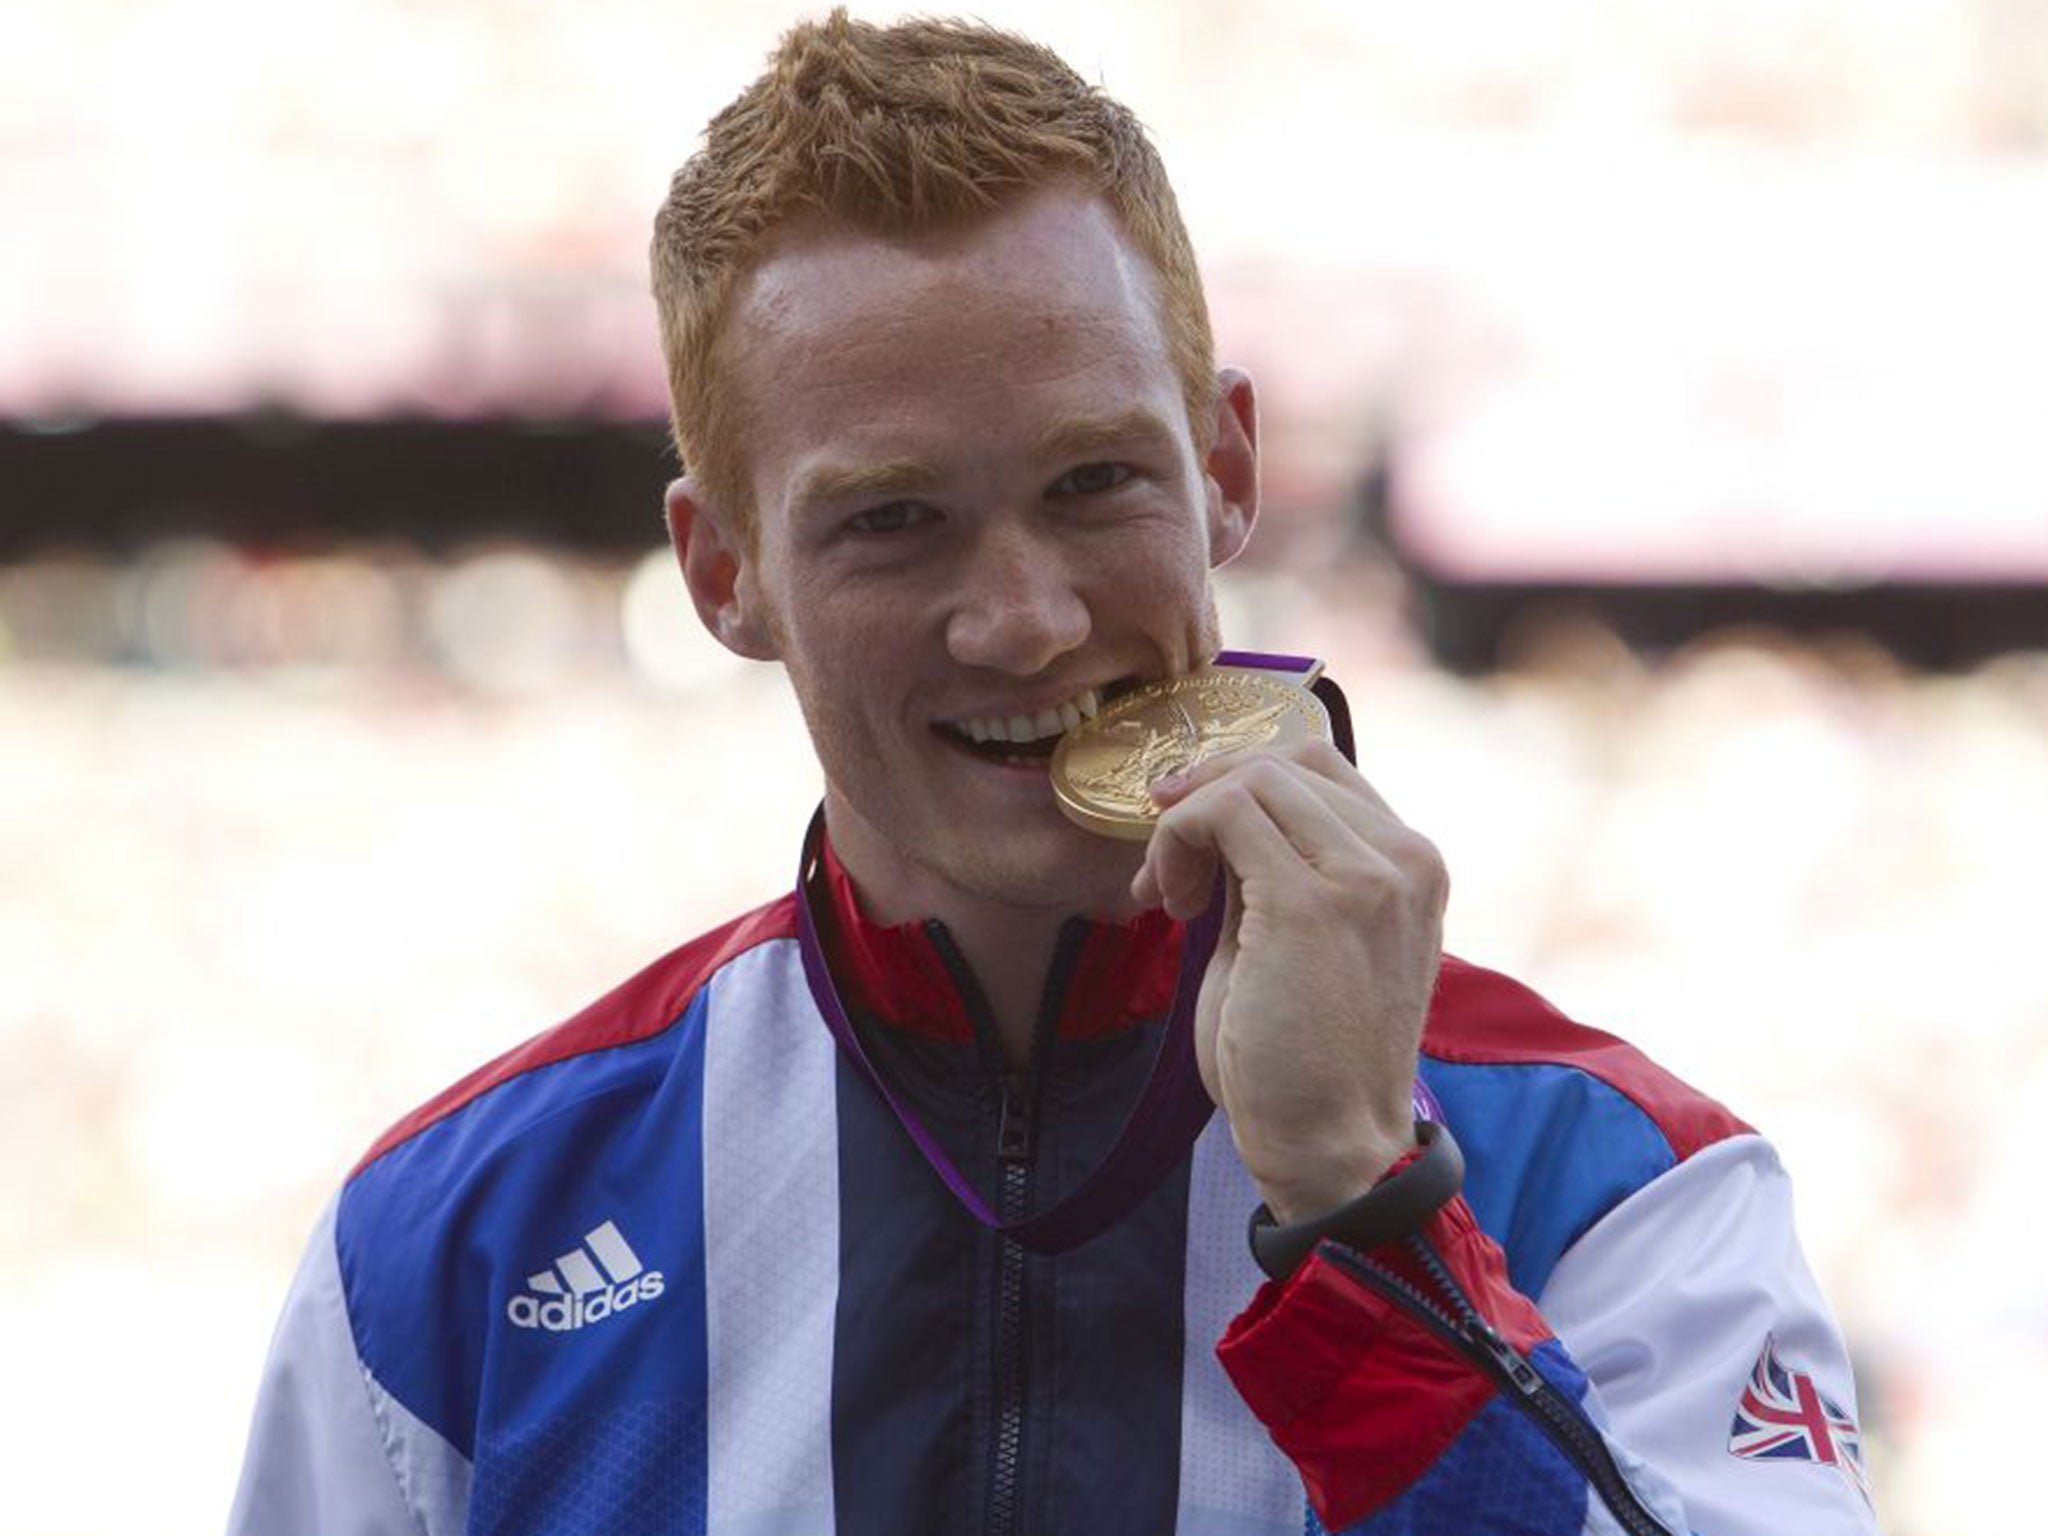 Greg Rutherford won Olympic gold at London 2012